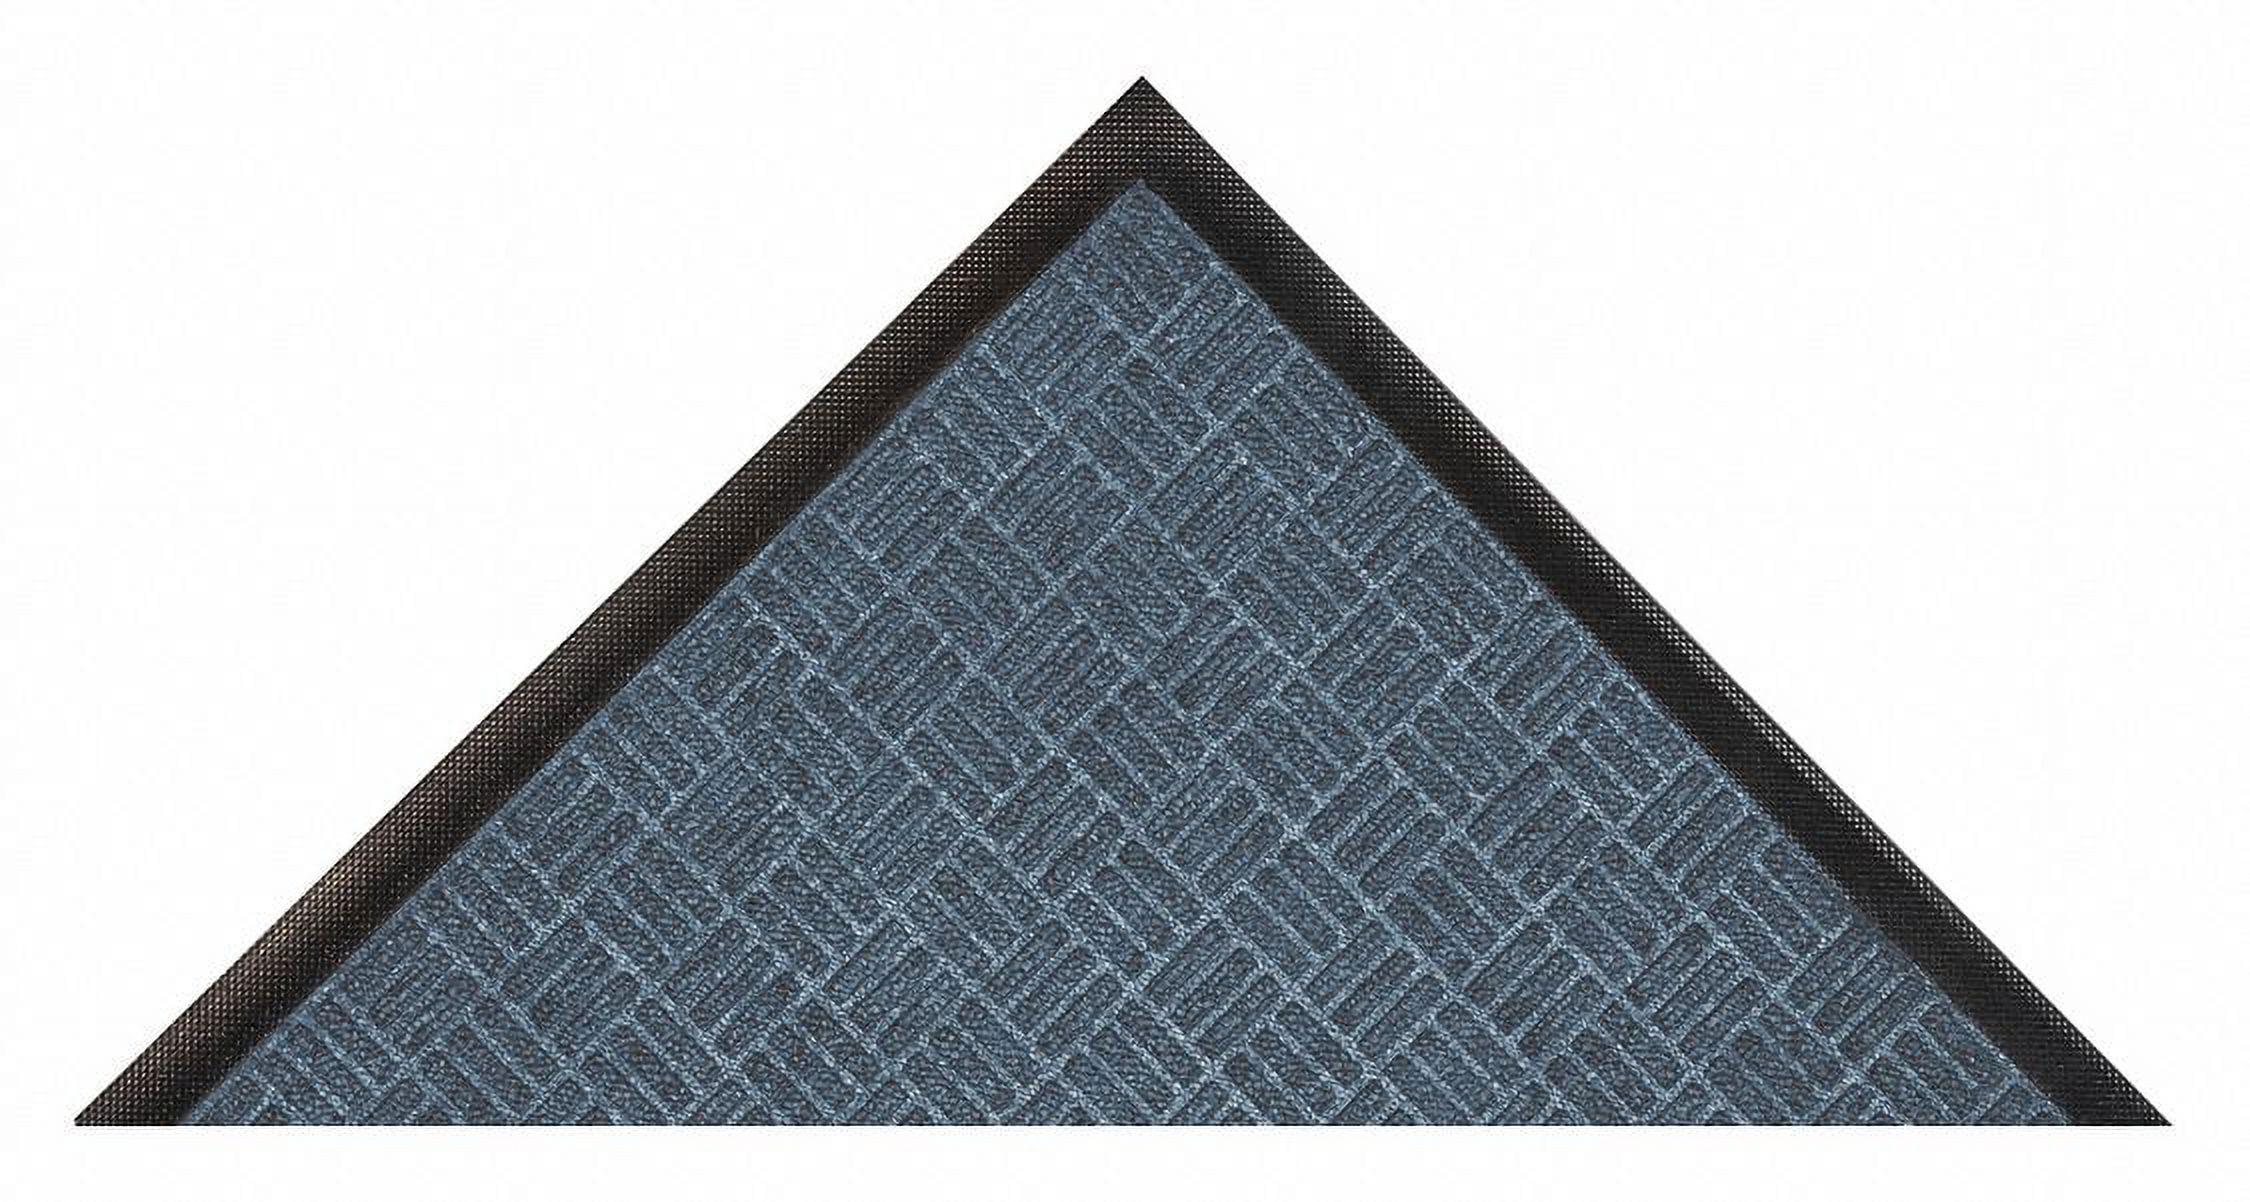 Notrax Carpeted Entrance Mat,Blue,3ft. x 5ft.  167S0035BU - image 1 of 5